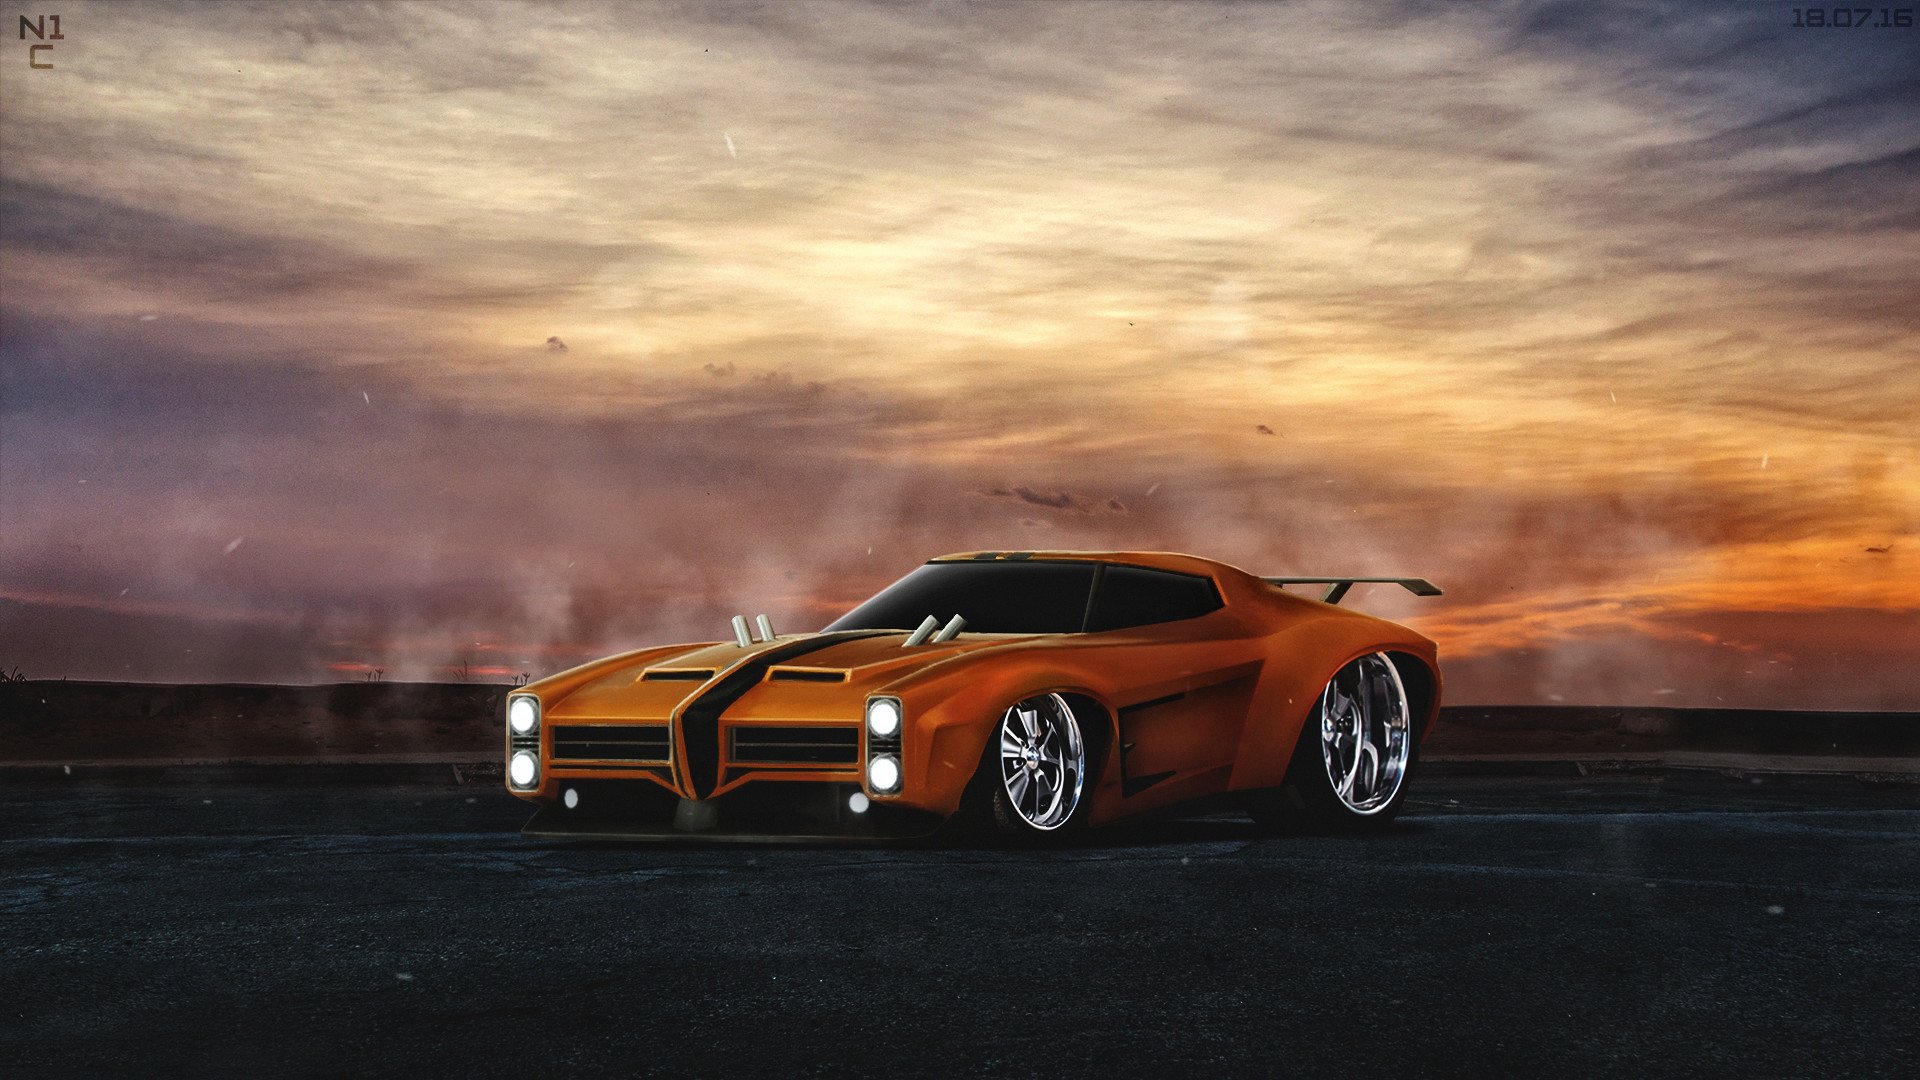 Dominus Wallpapers Vehicles Hq Dominus Pictures 4k Wallpapers 2019